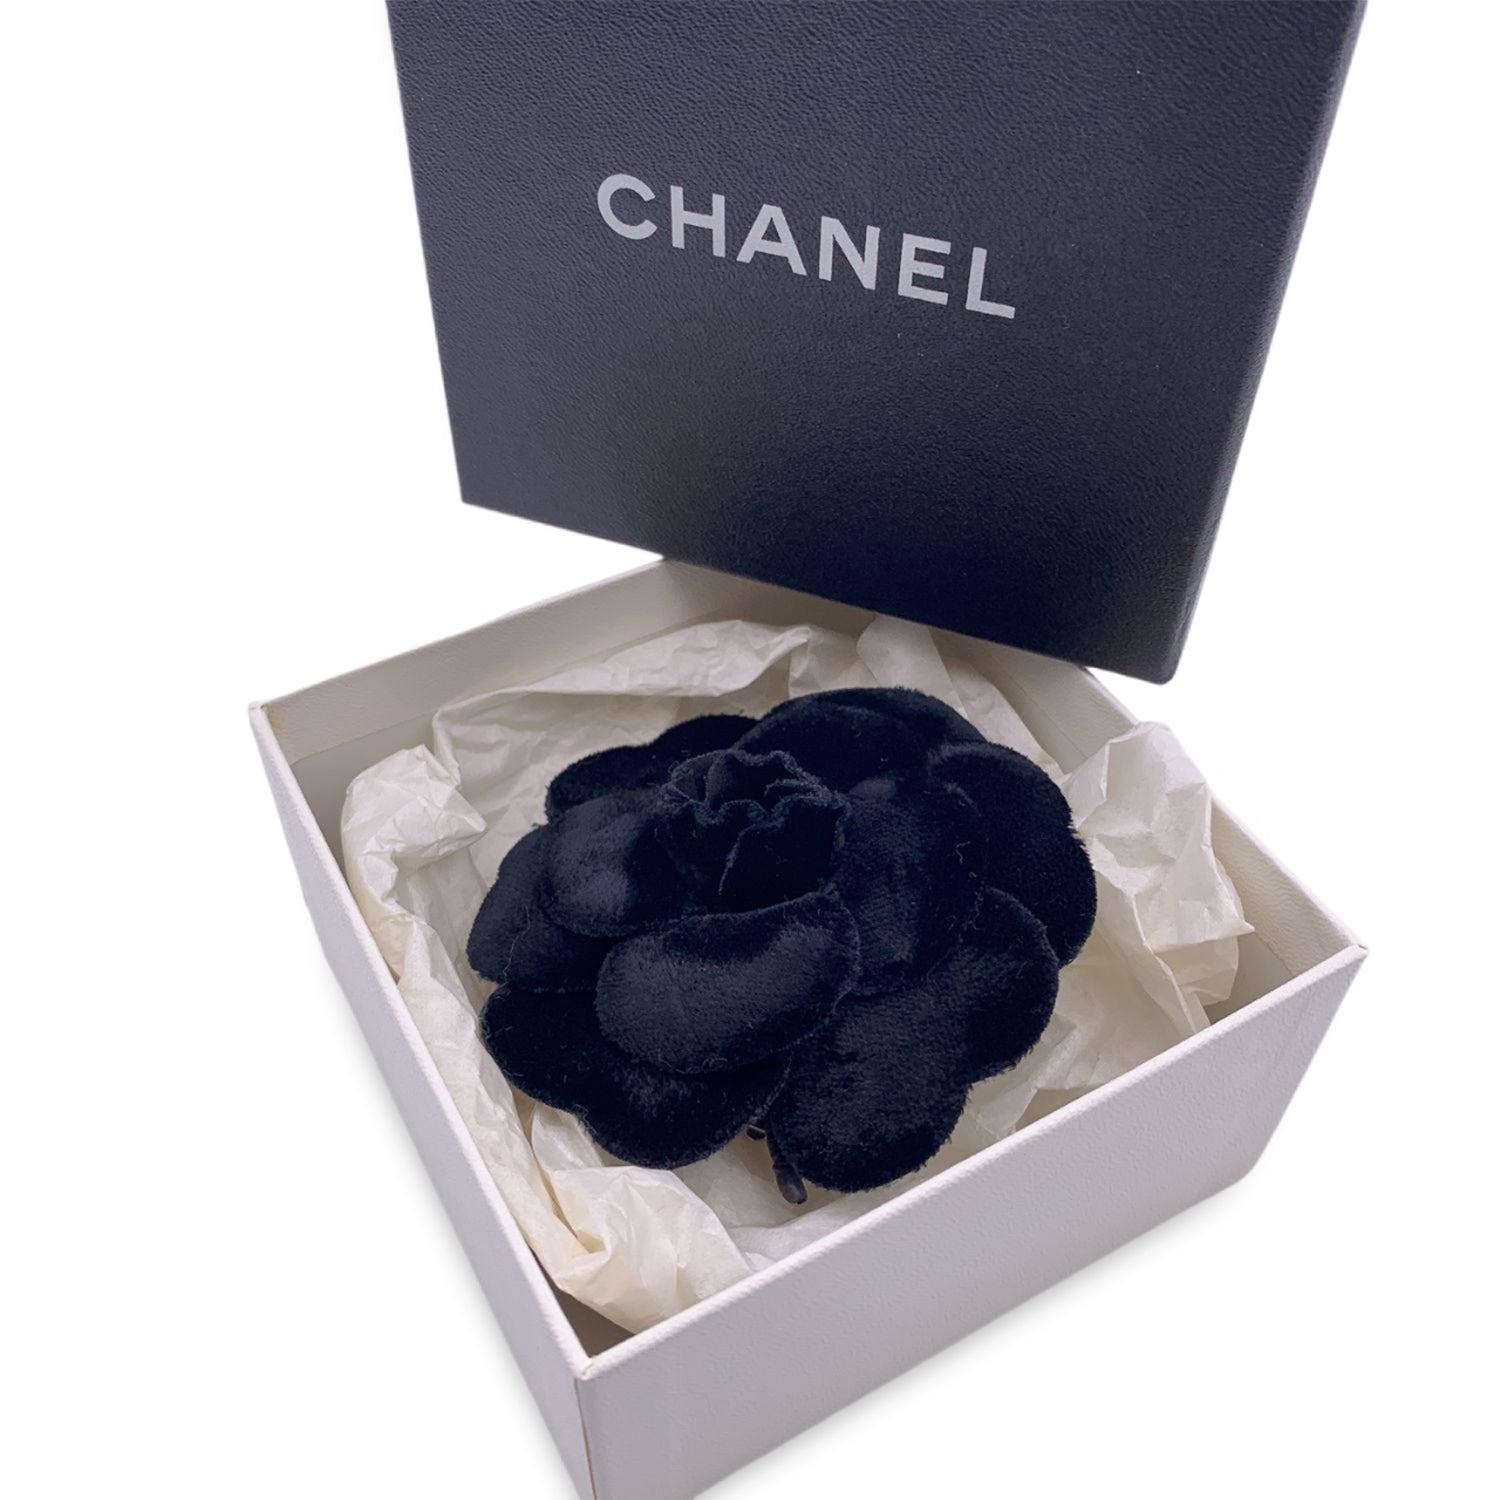 Chanel Vintage Camelia Camellia Flower Pin Brooch. Black velvet petals. Safety pin closure. Max width: 3.5 inches .- 8.9 cm. 'CHANEL - CC - Made in France' oval tab on the back Condition A - EXCELLENT Gently used. Please check the photos carefully